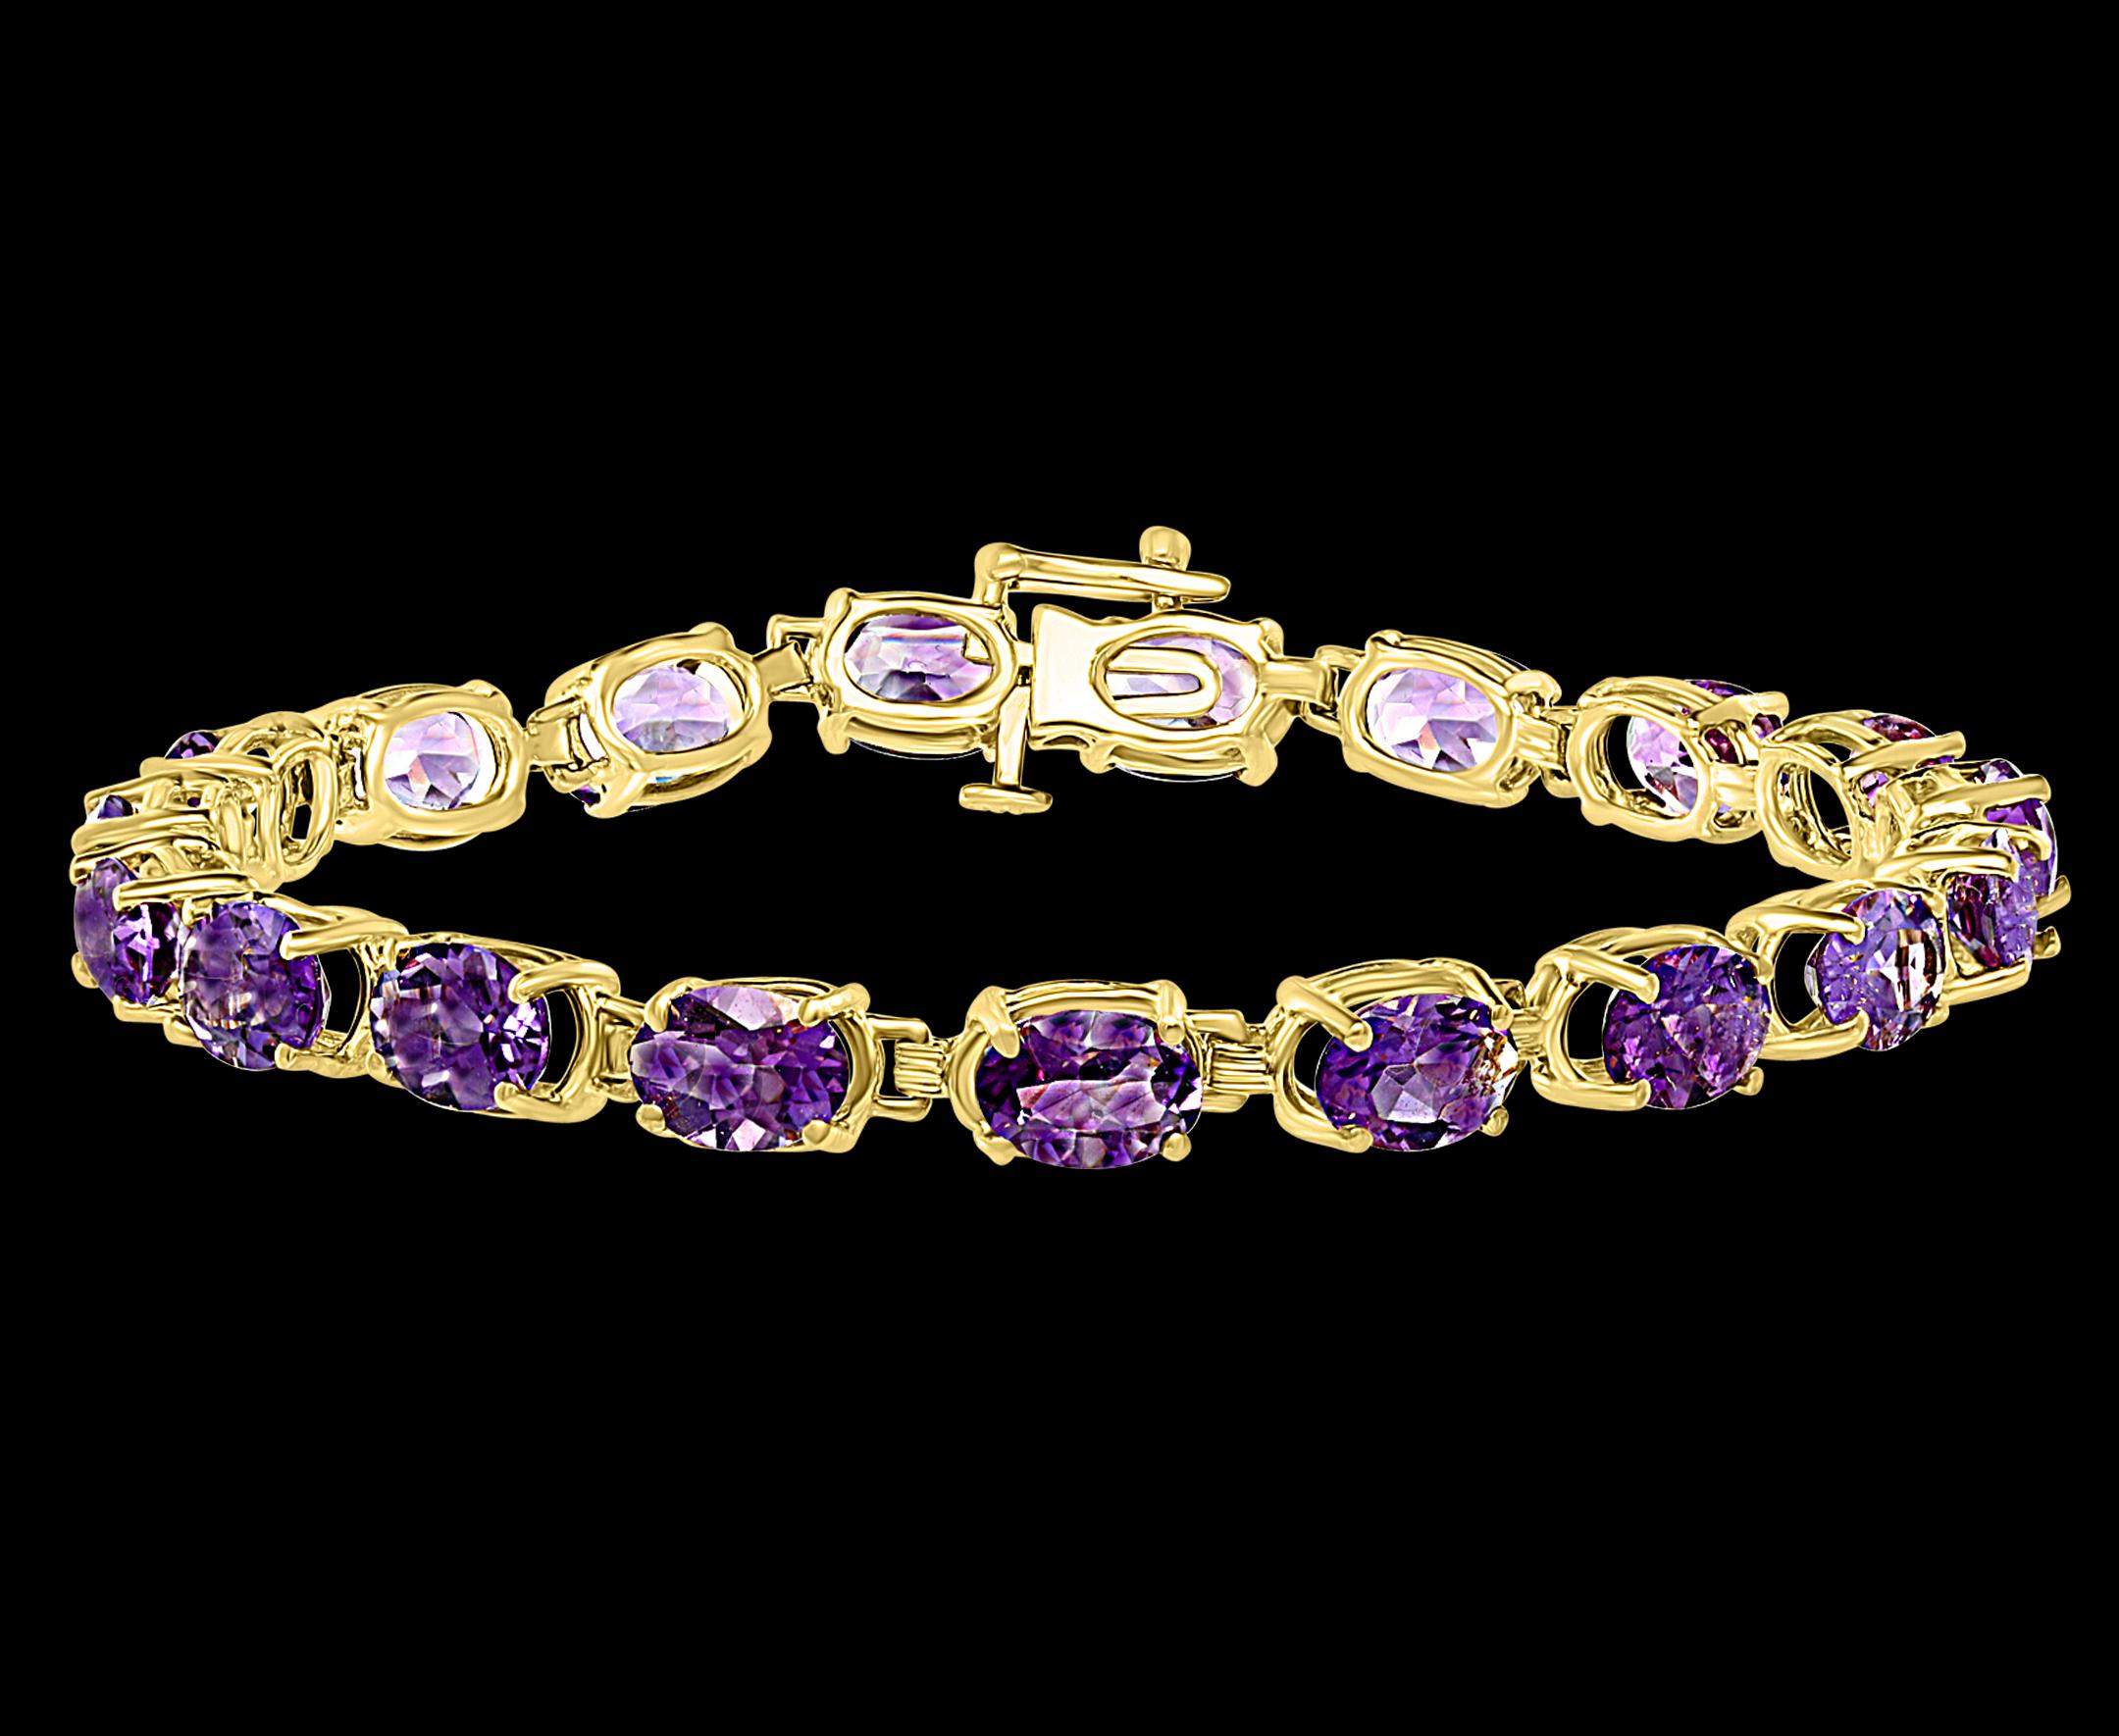  This exceptionally affordable Tennis  bracelet has  19 stones of oval shape Amethyst
Beautiful colors , very Vibrant
Size of the stone is approximately 7X5 mm

Total weight of these Amethyst is approximately 12 Ct
The bracelet is expertly crafted